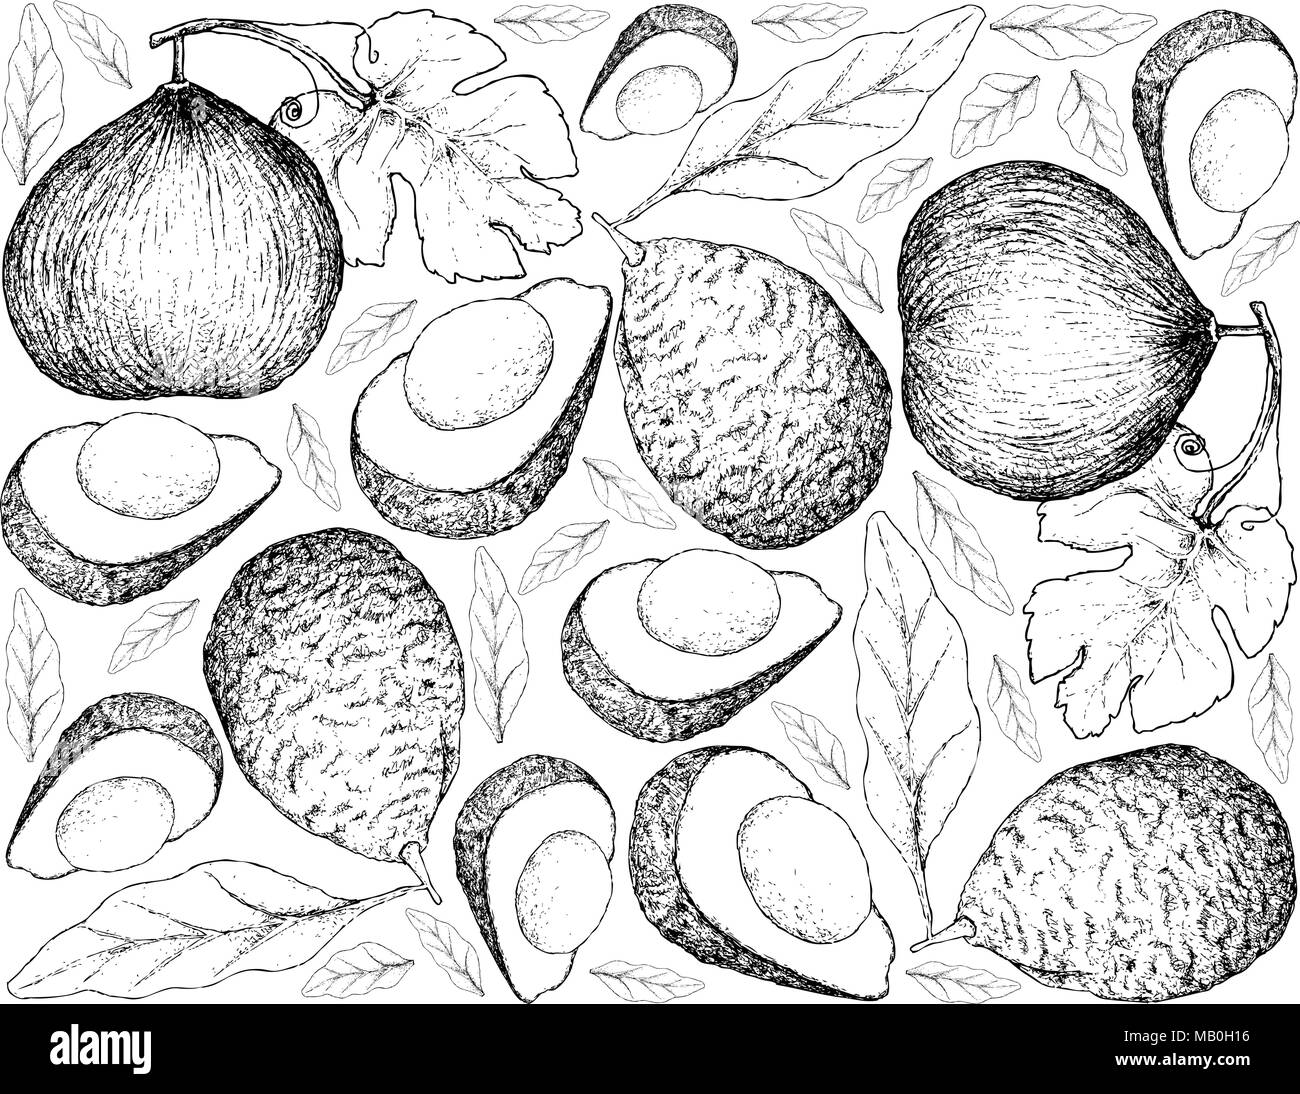 Exotic Fruit, Illustration Wallpaper Background of Hand Drawn Sketch of Casaba Melon and Avocado or Persea Americana Fruits. Stock Vector